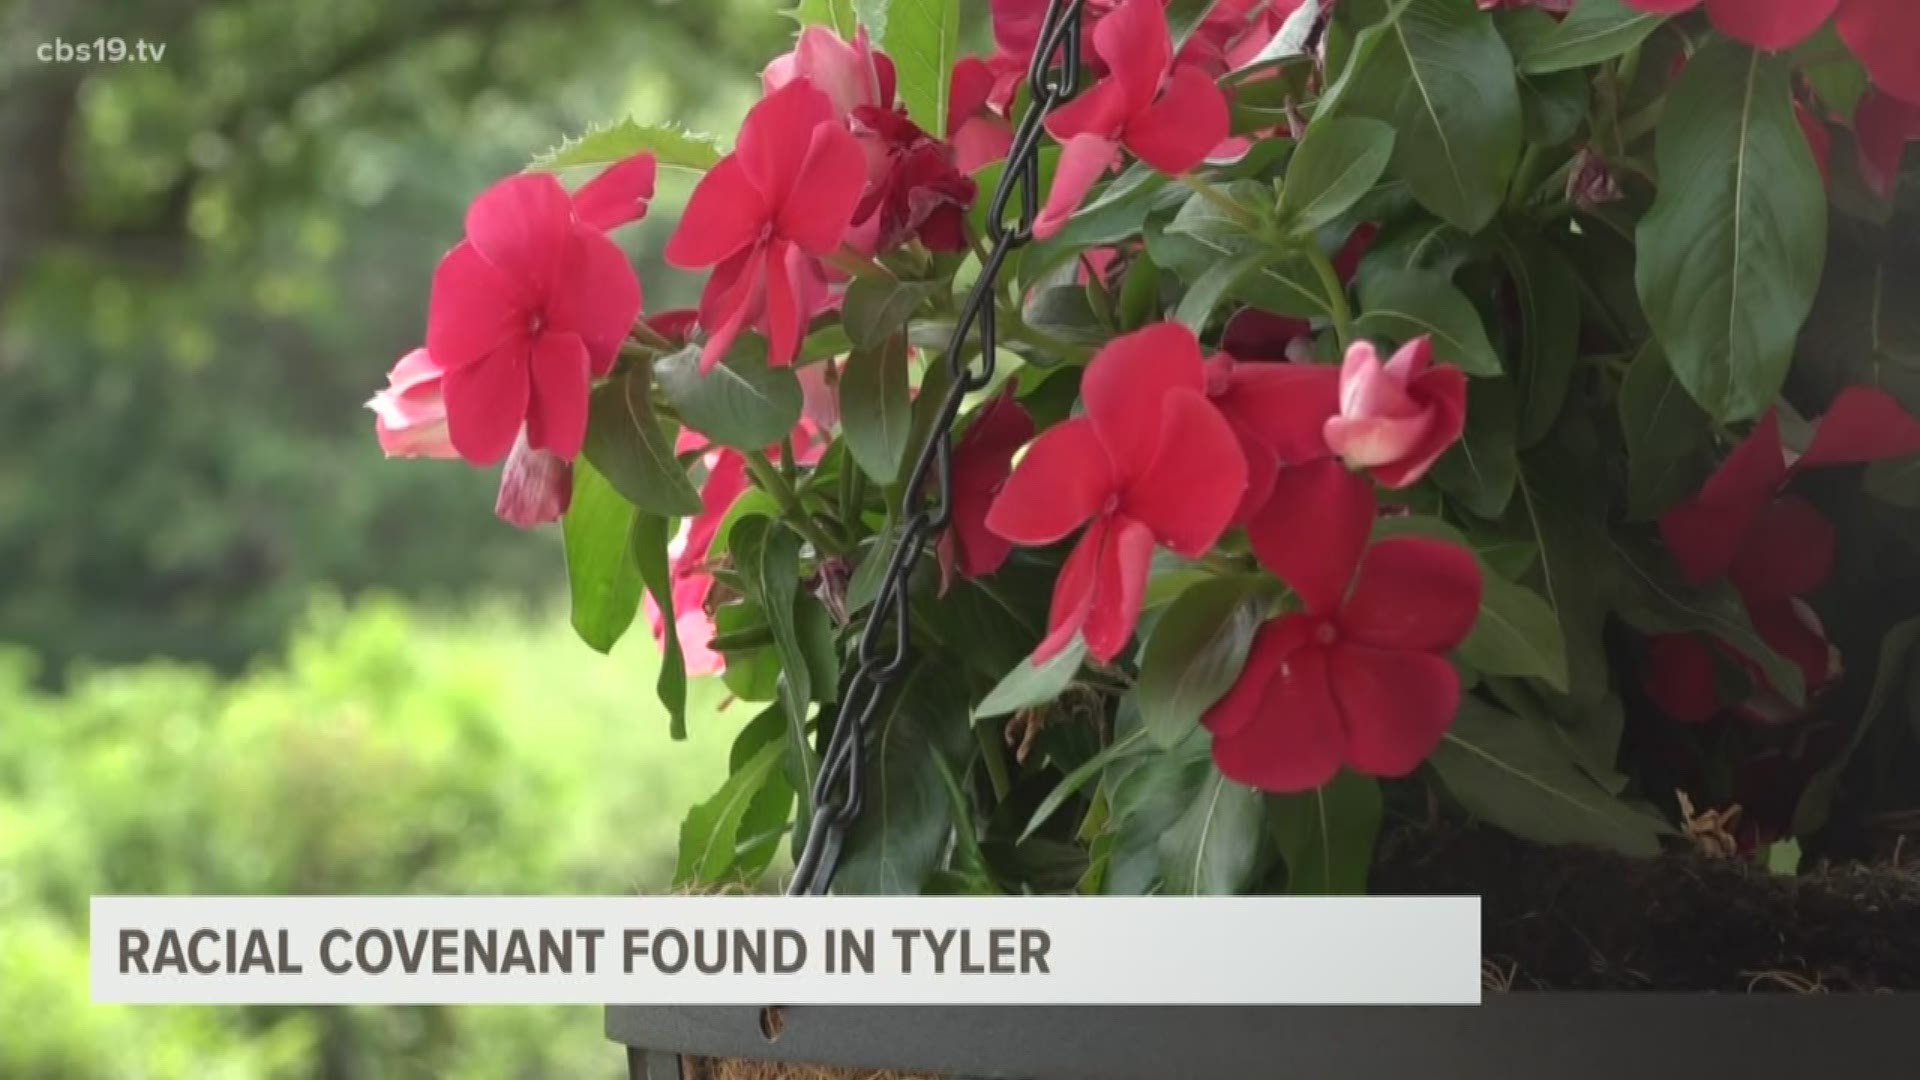 Homeowner describes historic "racial covenant" found in Tyler